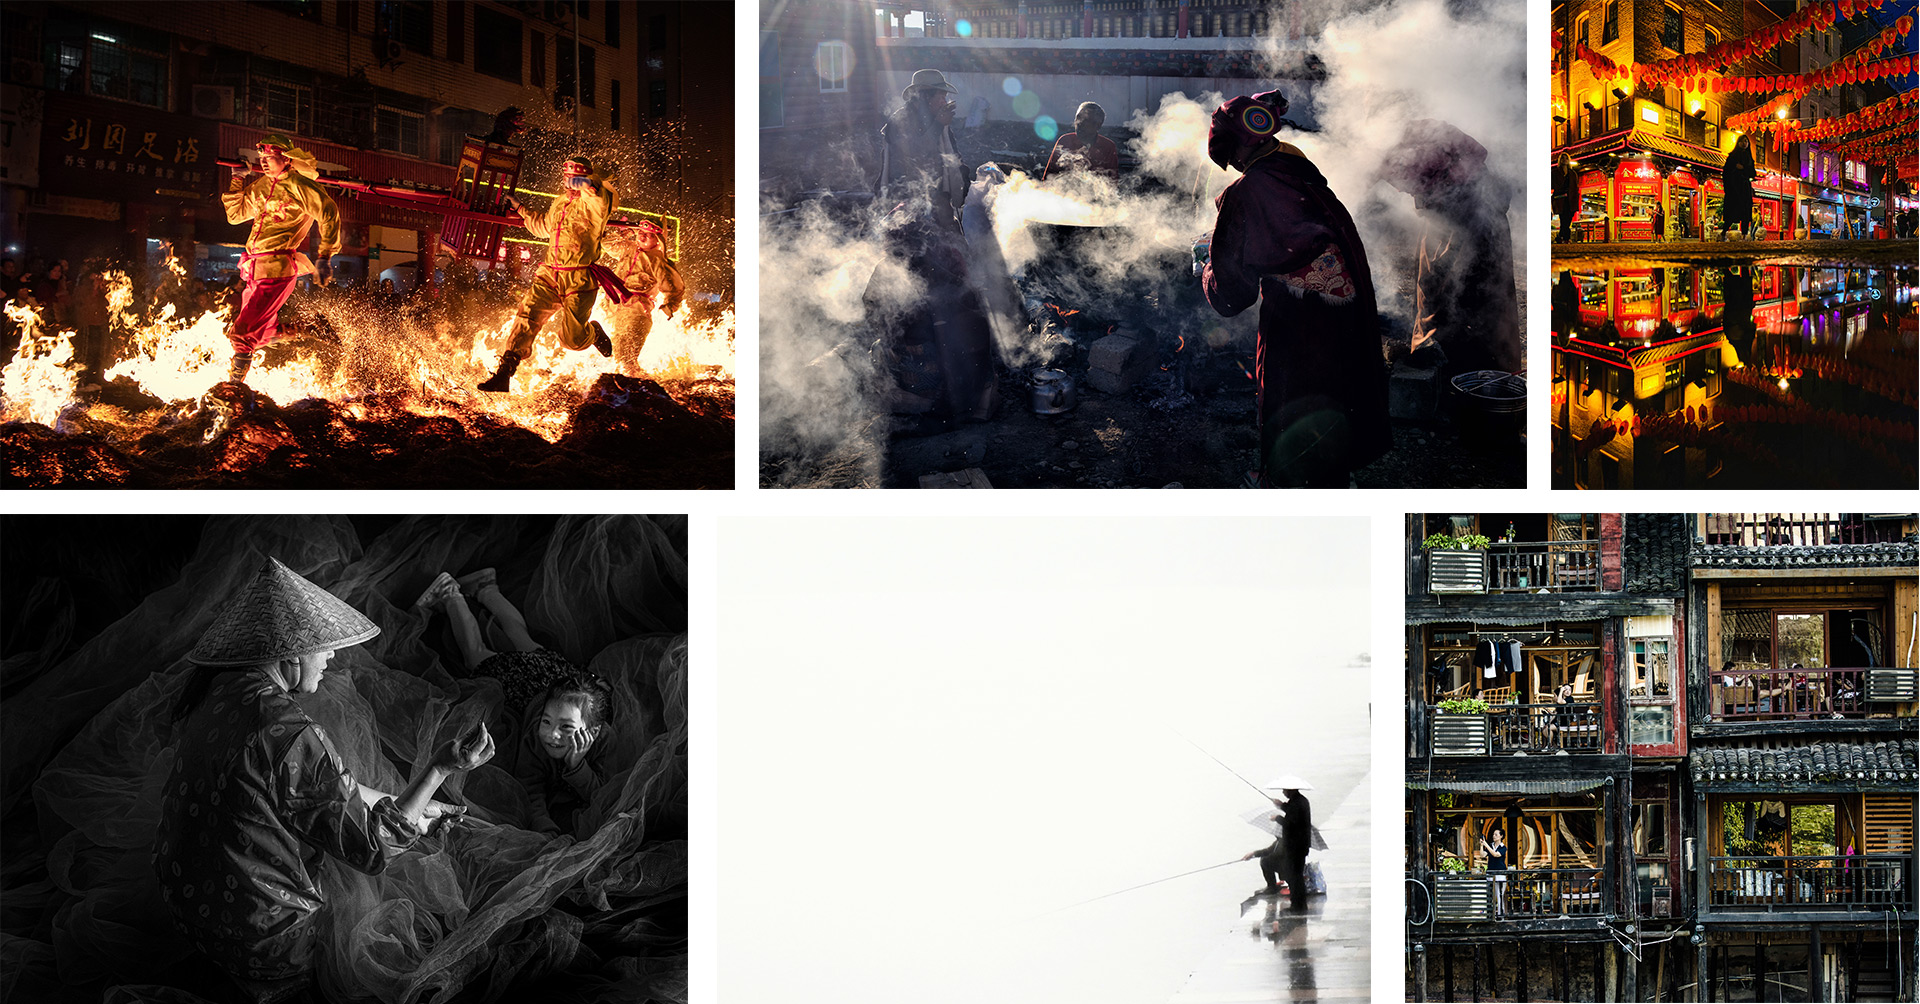 Winners of the other GSPA categories: Top L-R: Above the Flames by Ni Chen; Preparing for Breakfast by Aris Liem; Chinese NY, Chinatown, London by Olivia Ritchie. Bottom L-R: Mending the Nets by Susan Moss; Cloud Fishing by Karen Morris-Lanz; Life in Squares by Miao Qing